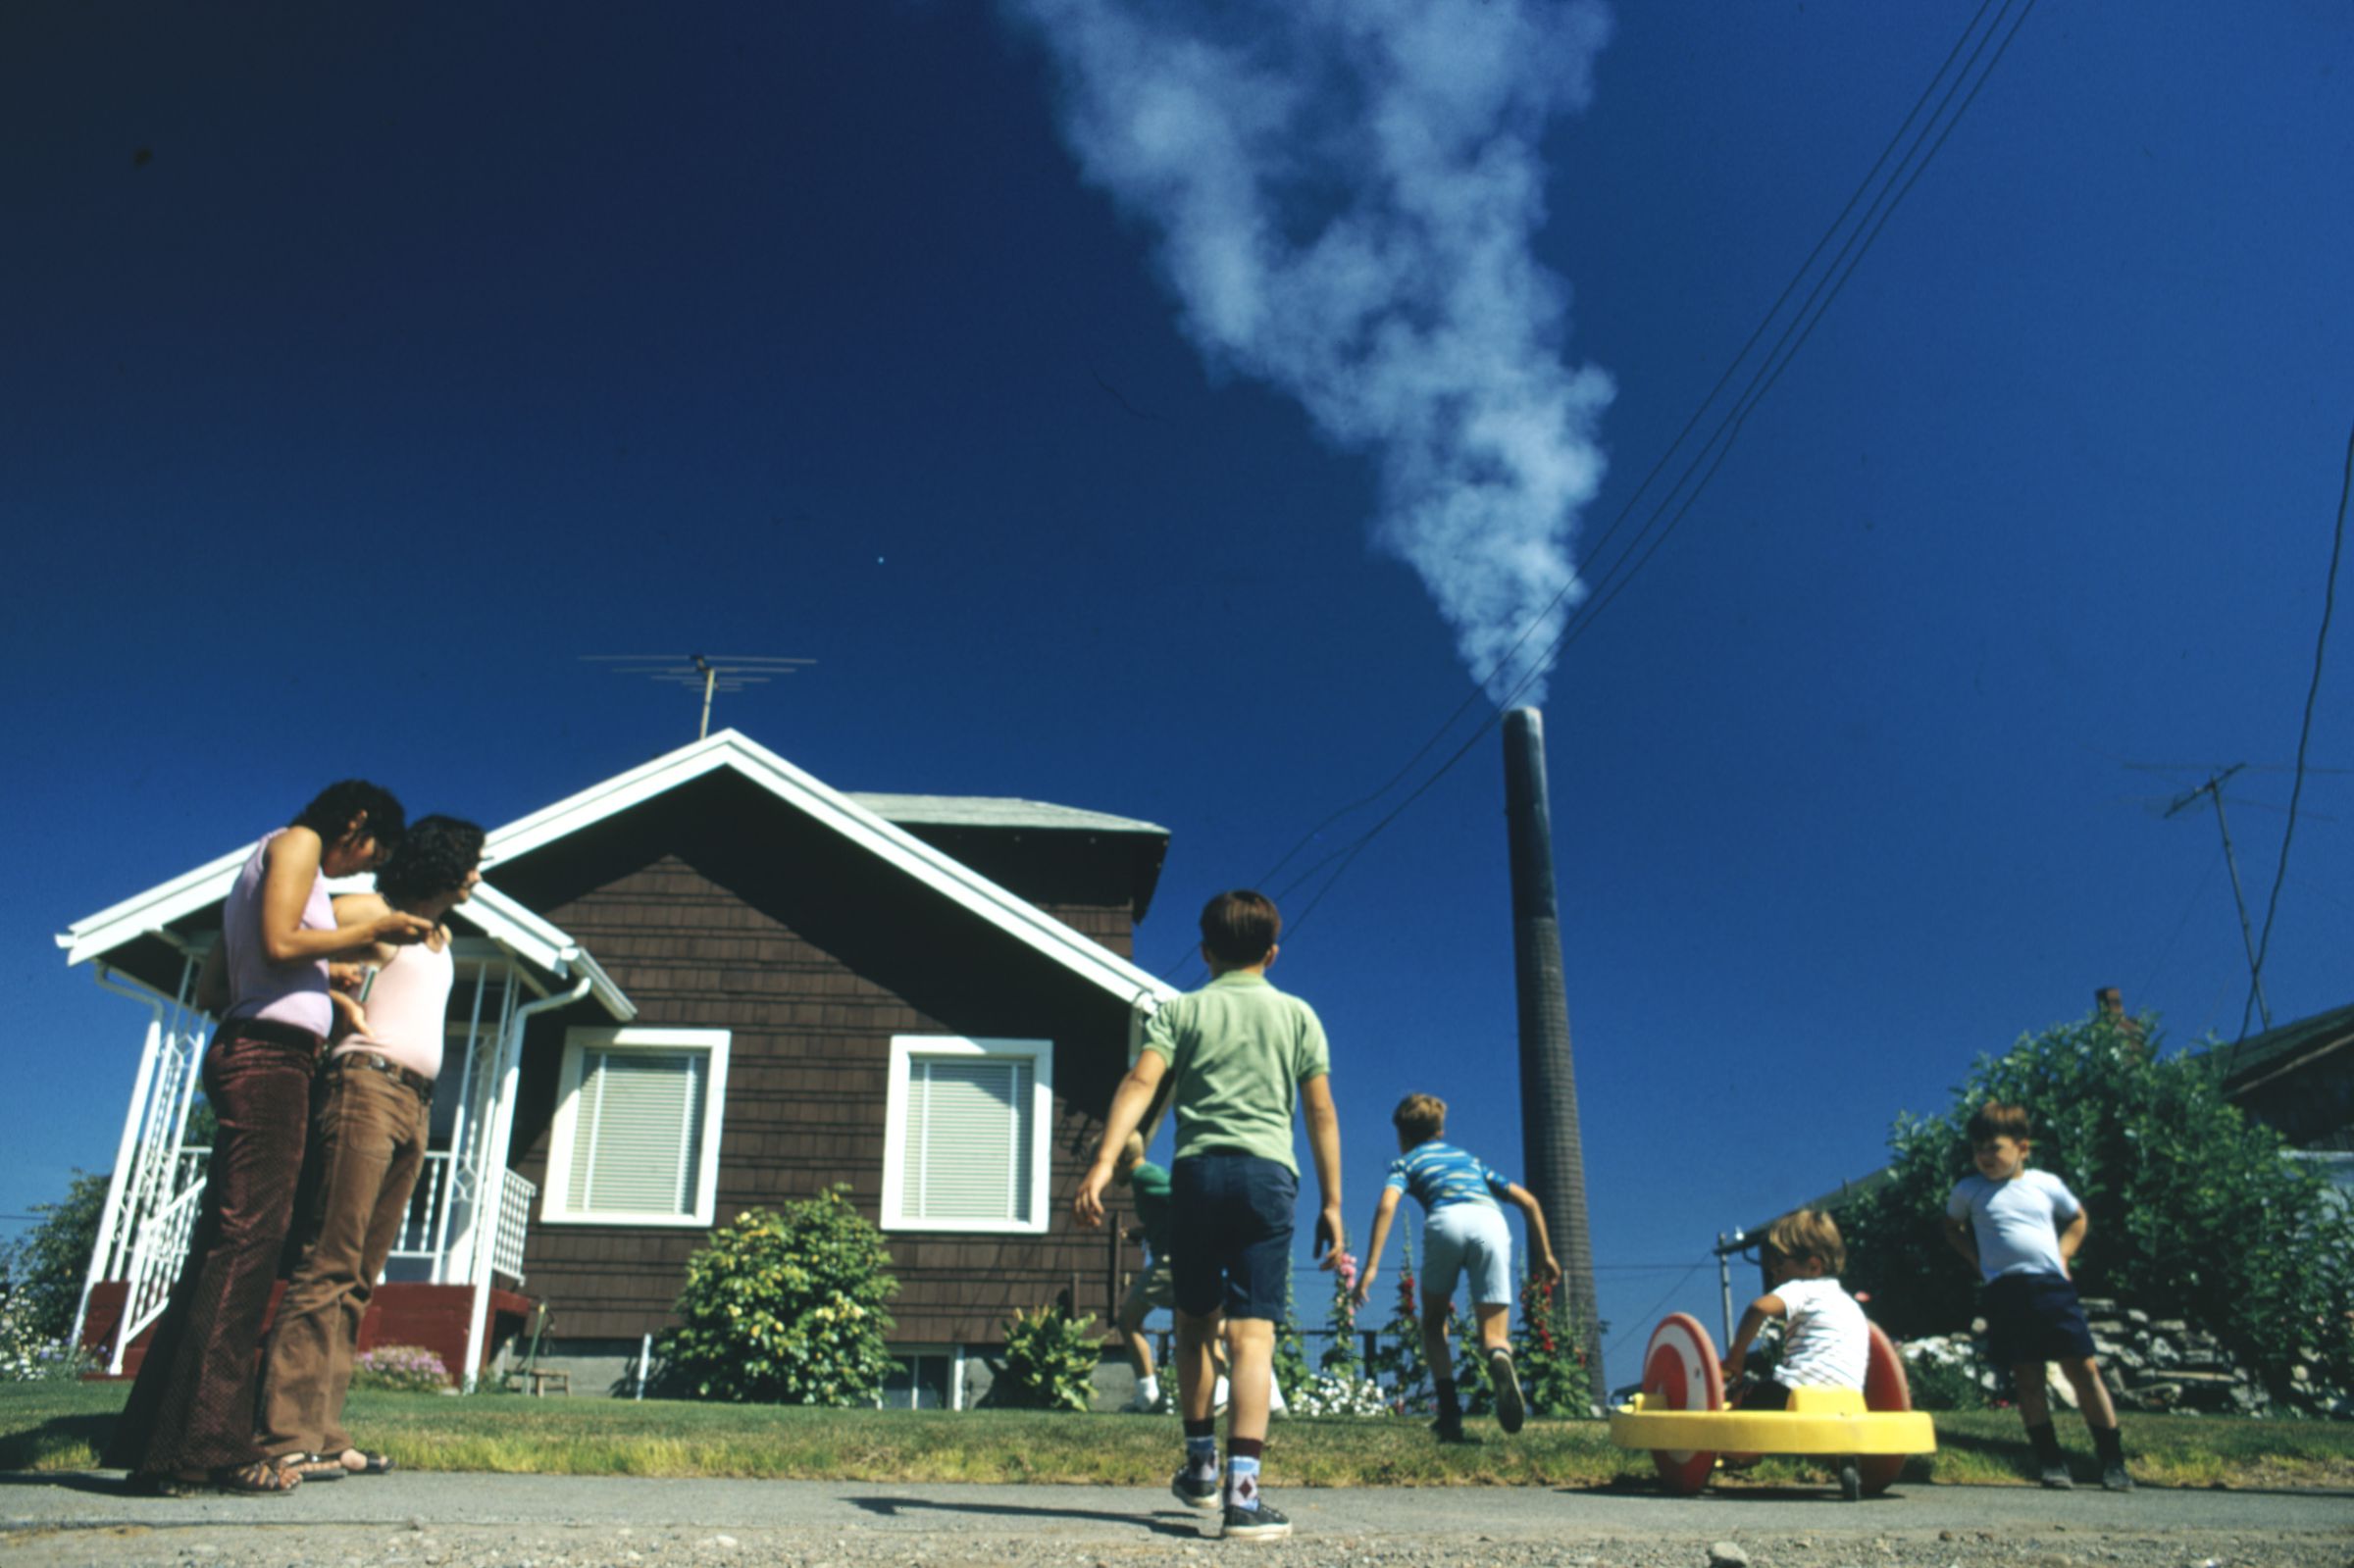 Children play in the yard of a home in Ruston, Washington, while a smelter stack showers the area with arsenic and lead residue in 1972.